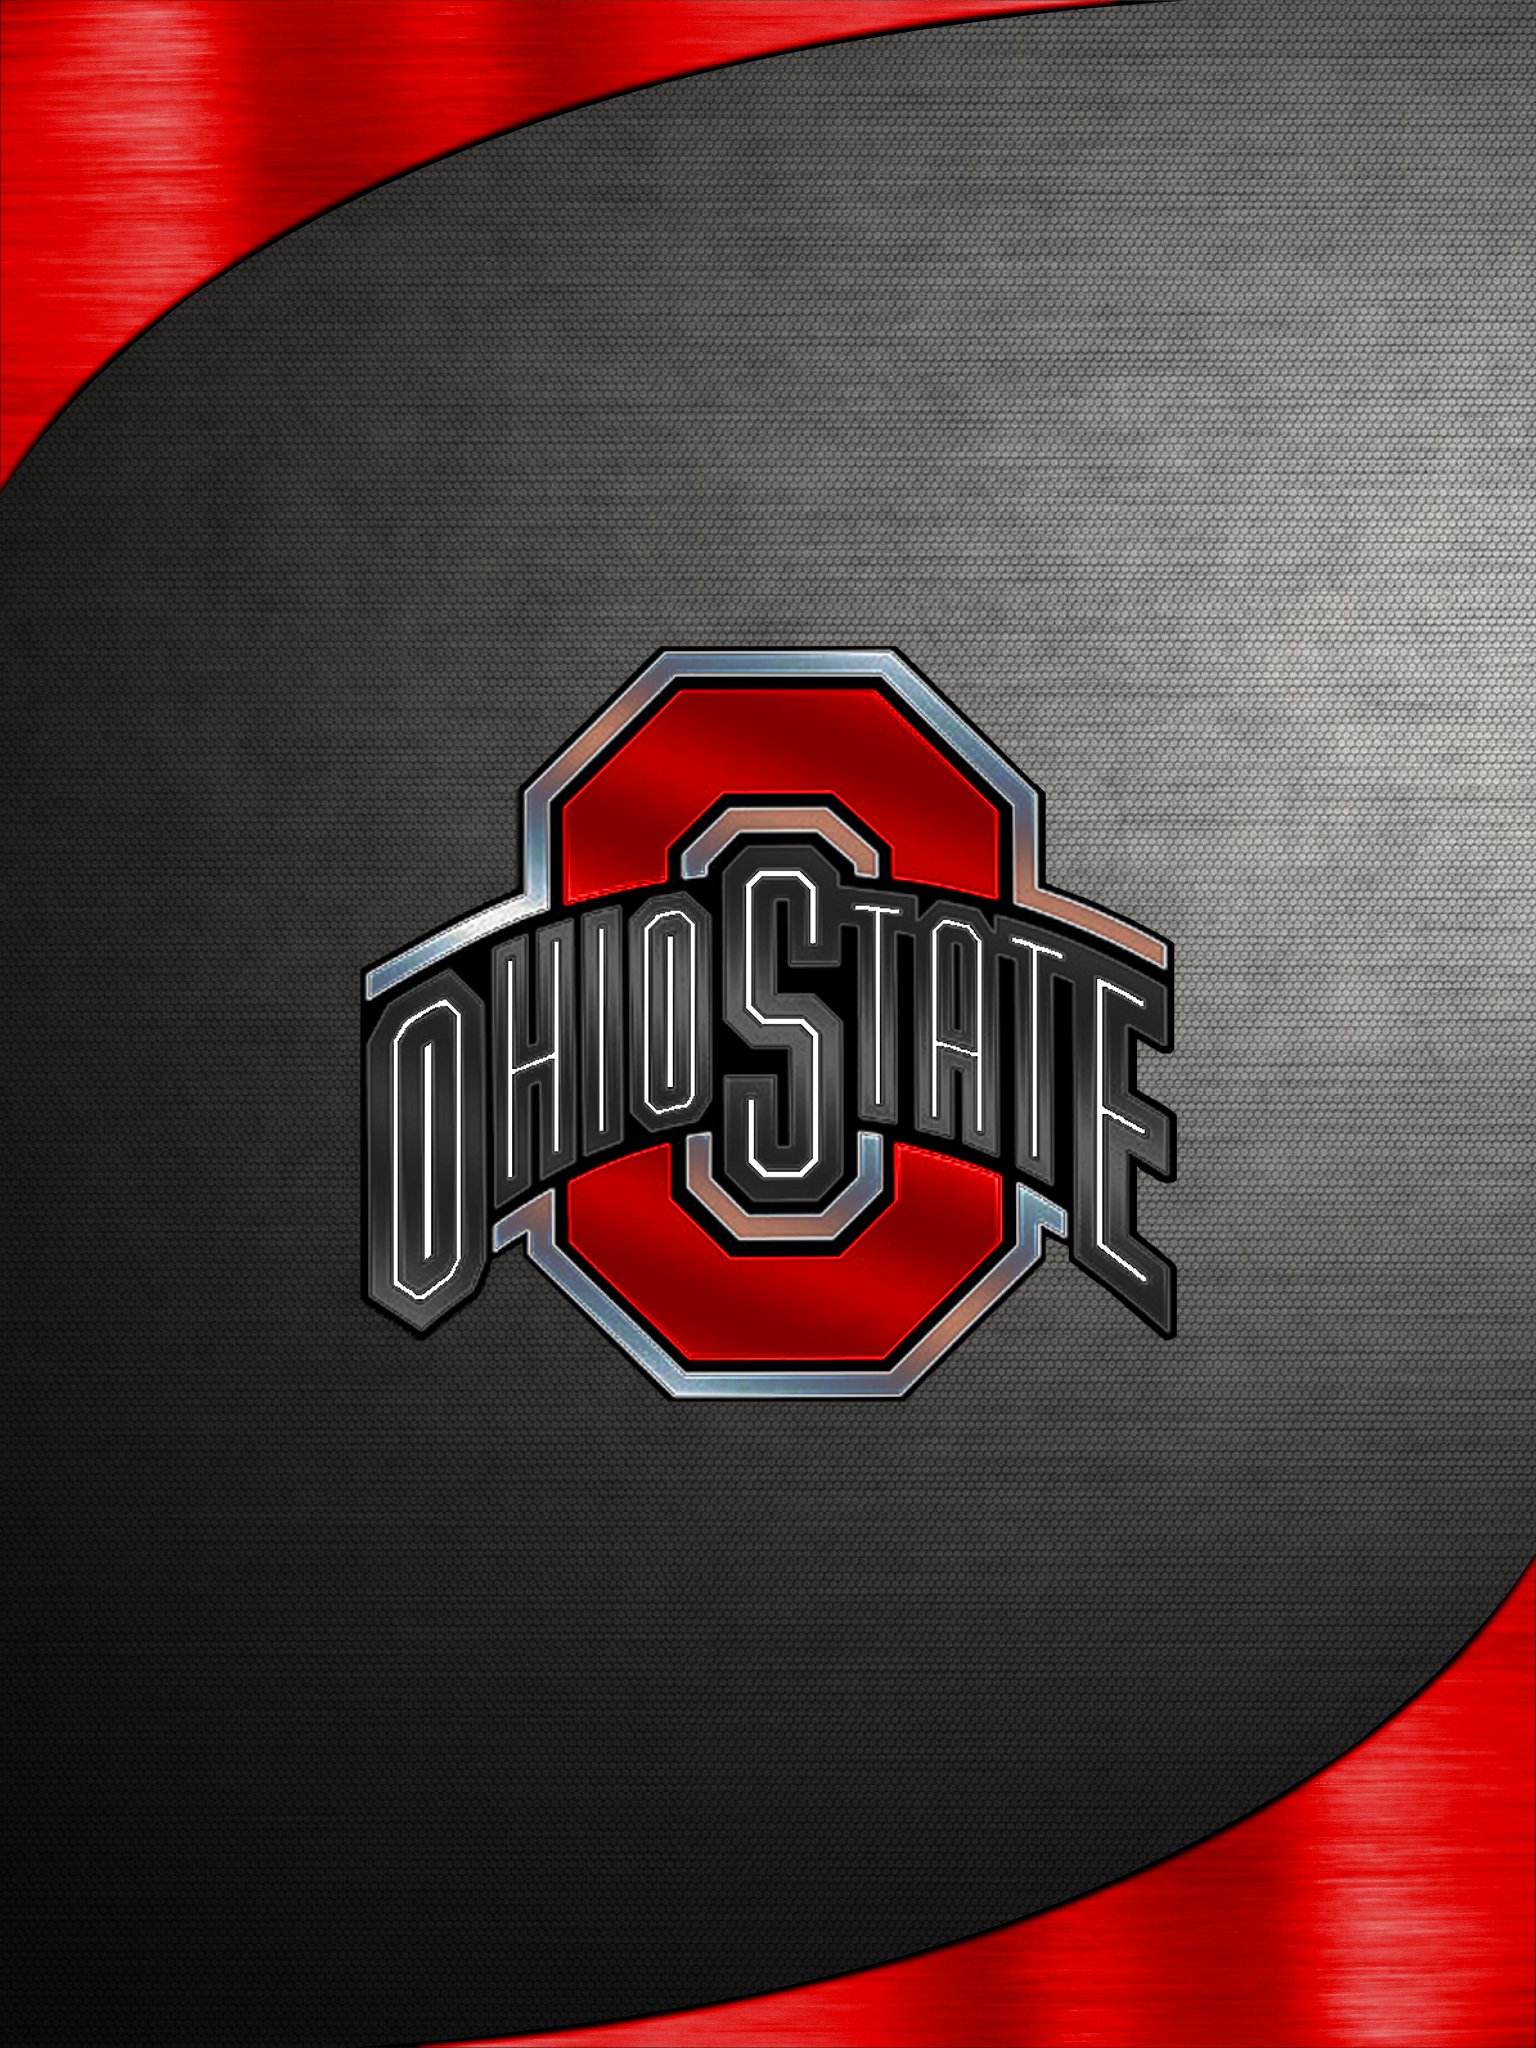 Ohio State Football Wallpaper Image Amp Pictures Becuo